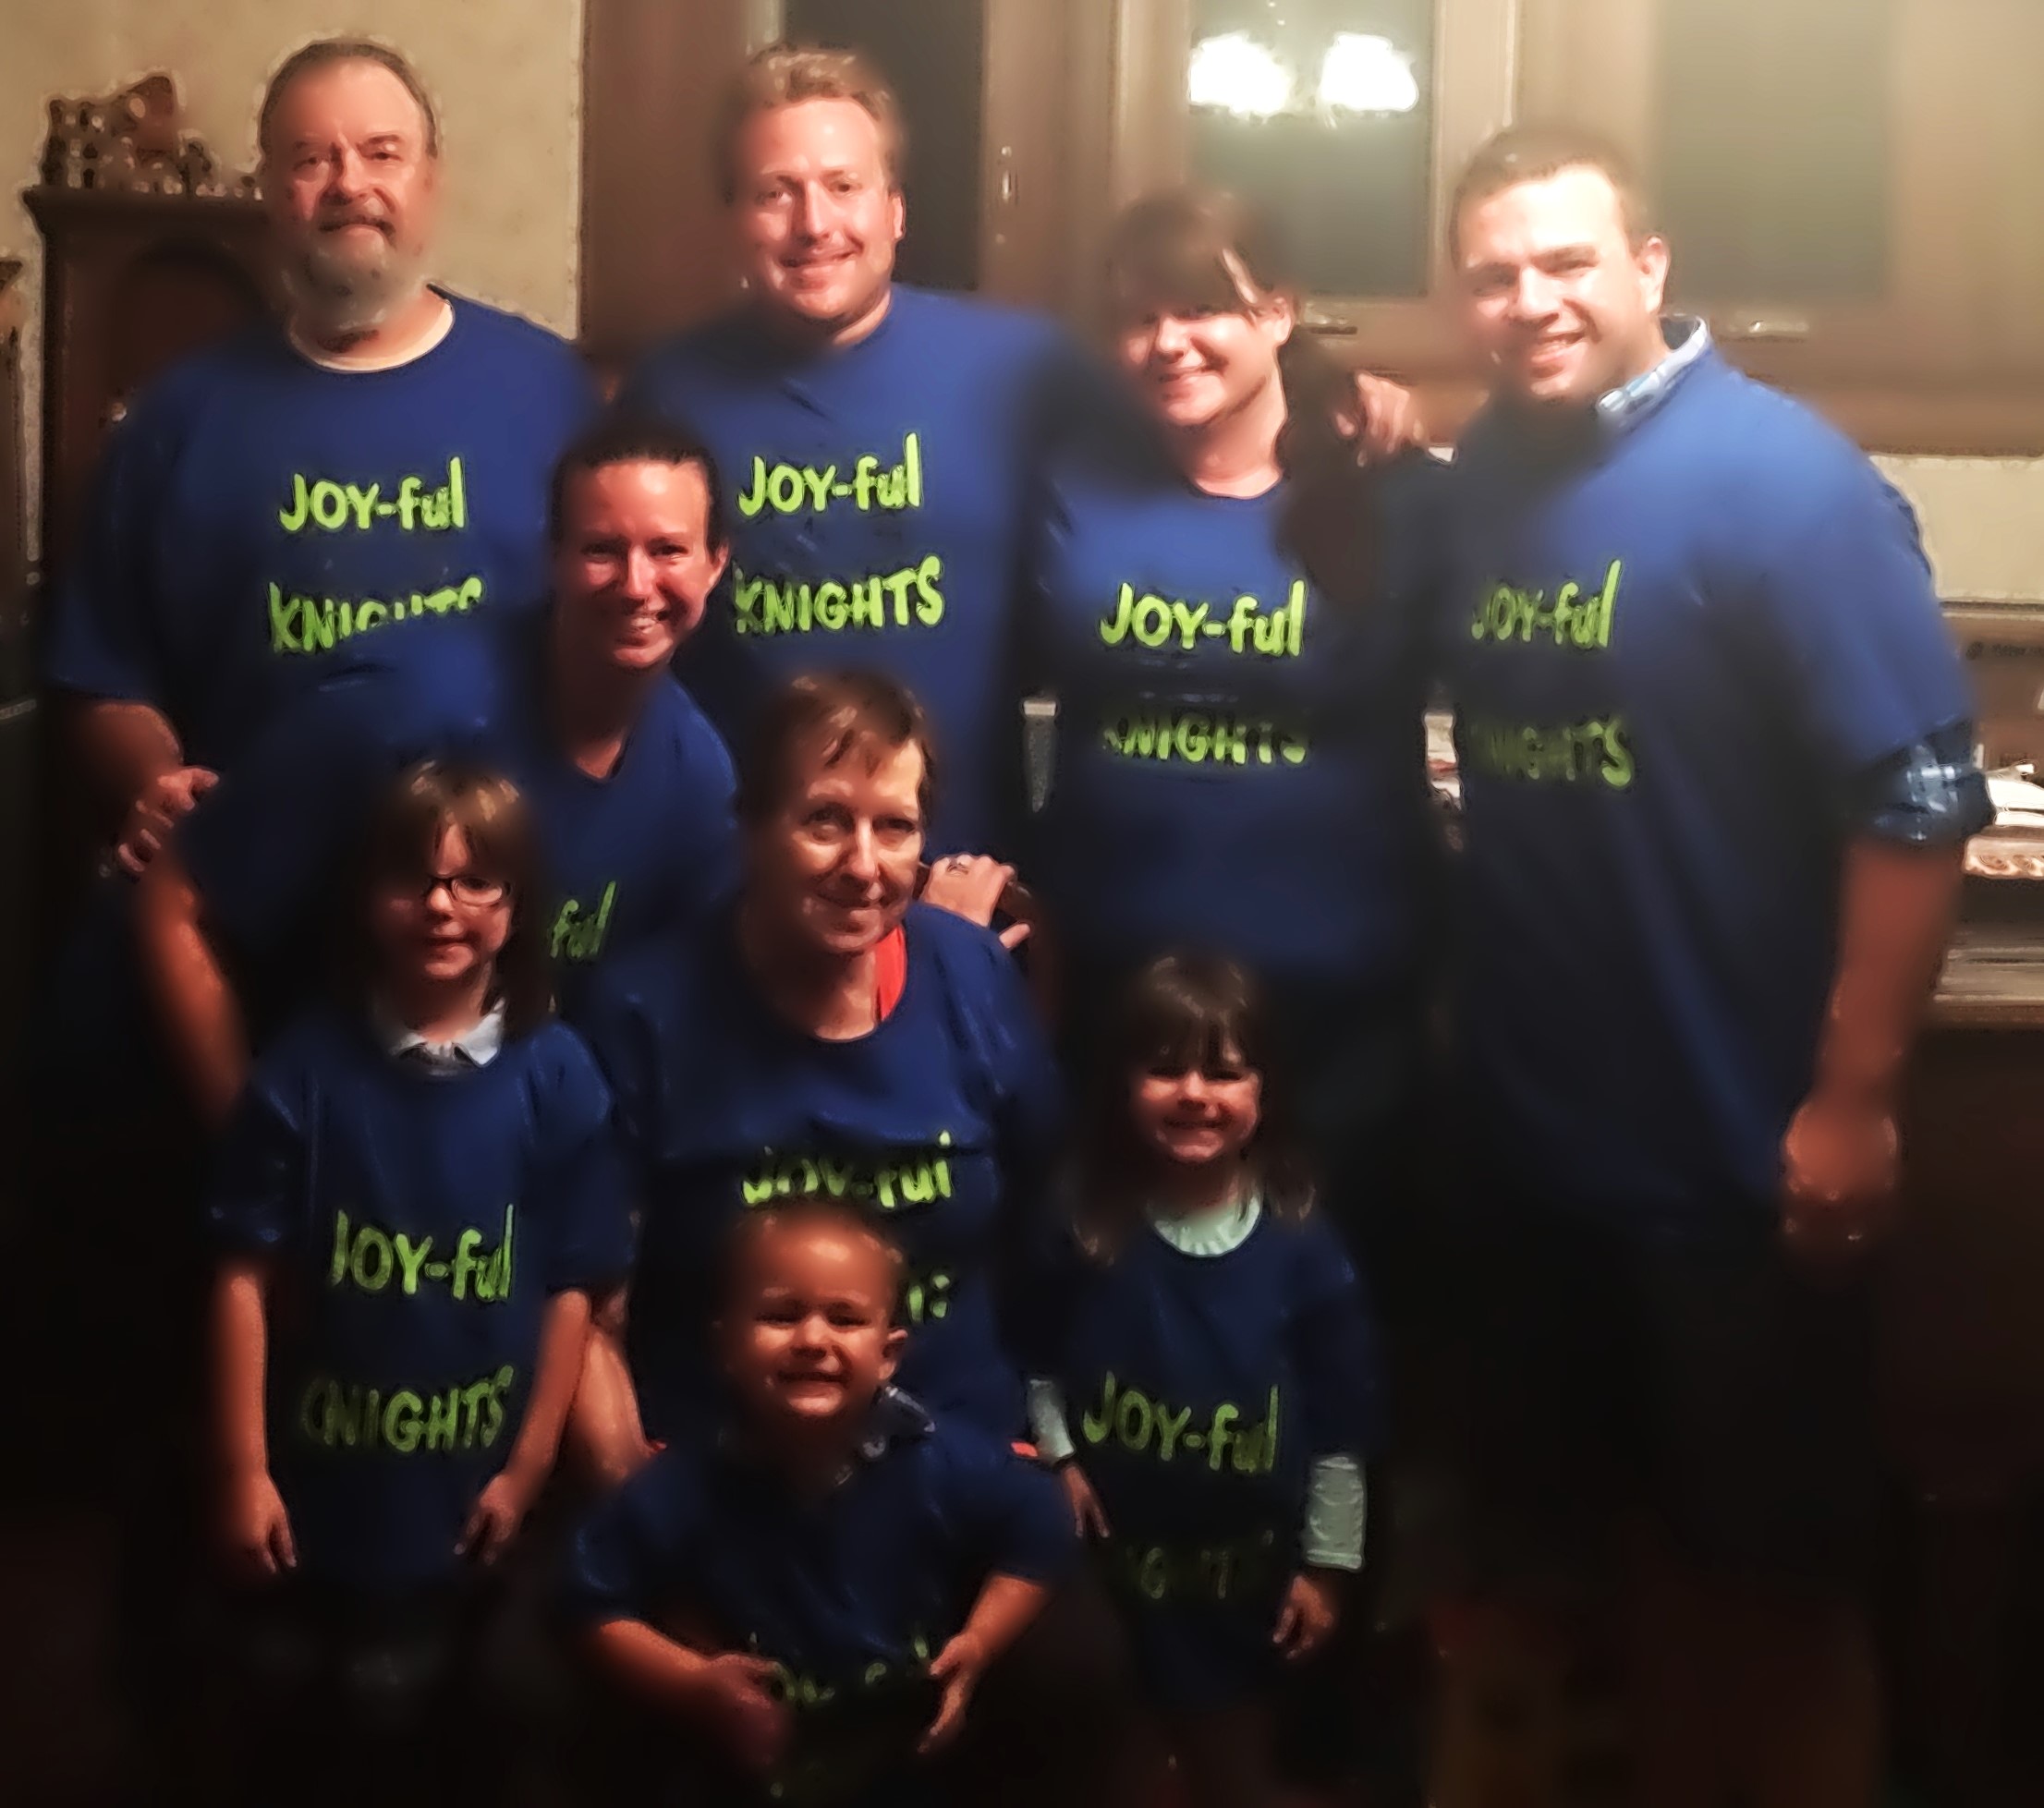 Six adults and three children all wearing blue shirts that say Joy-ful Nights